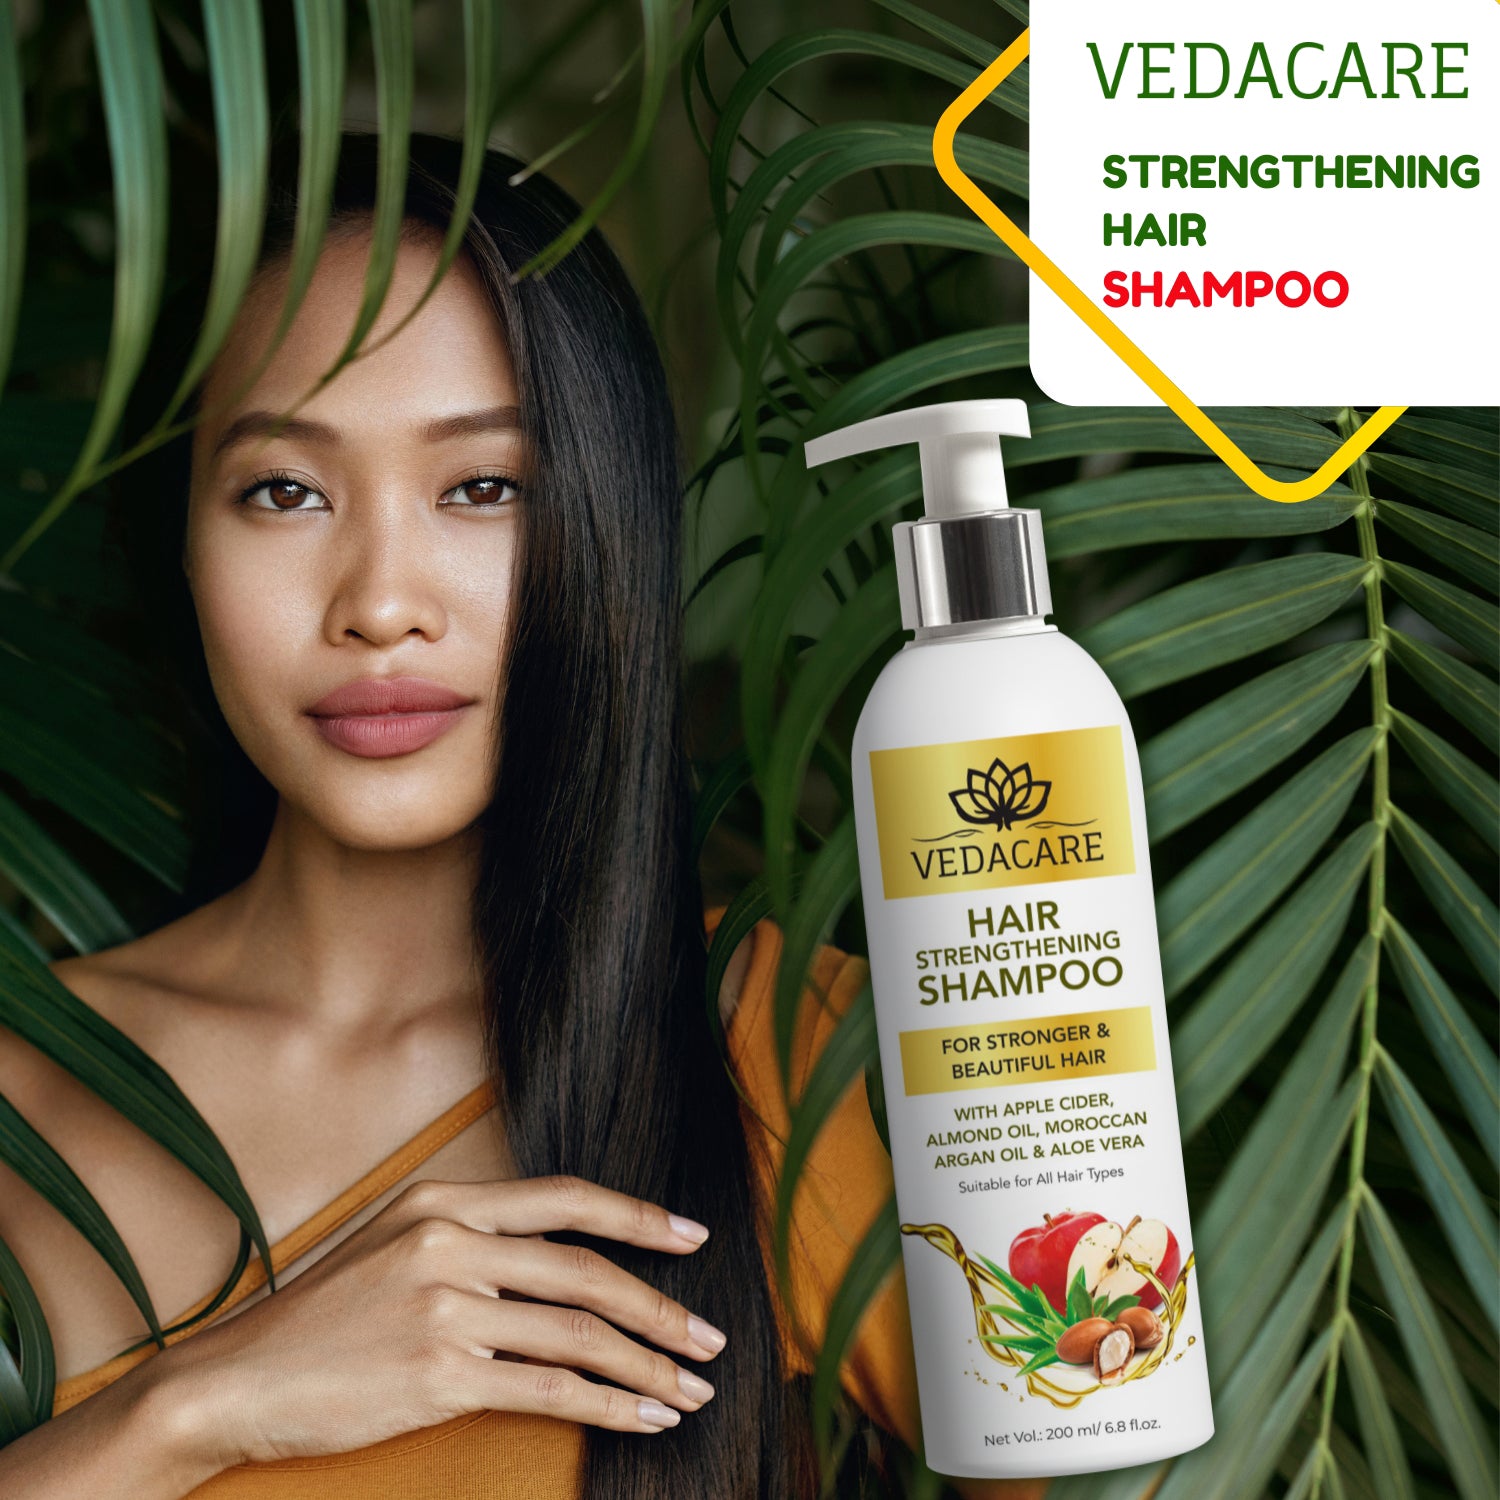 Vedacare Hair Strengthening Shampoo With Apple Cider, Moroccan Argan Oil, Aloe Vera and Almond Oil